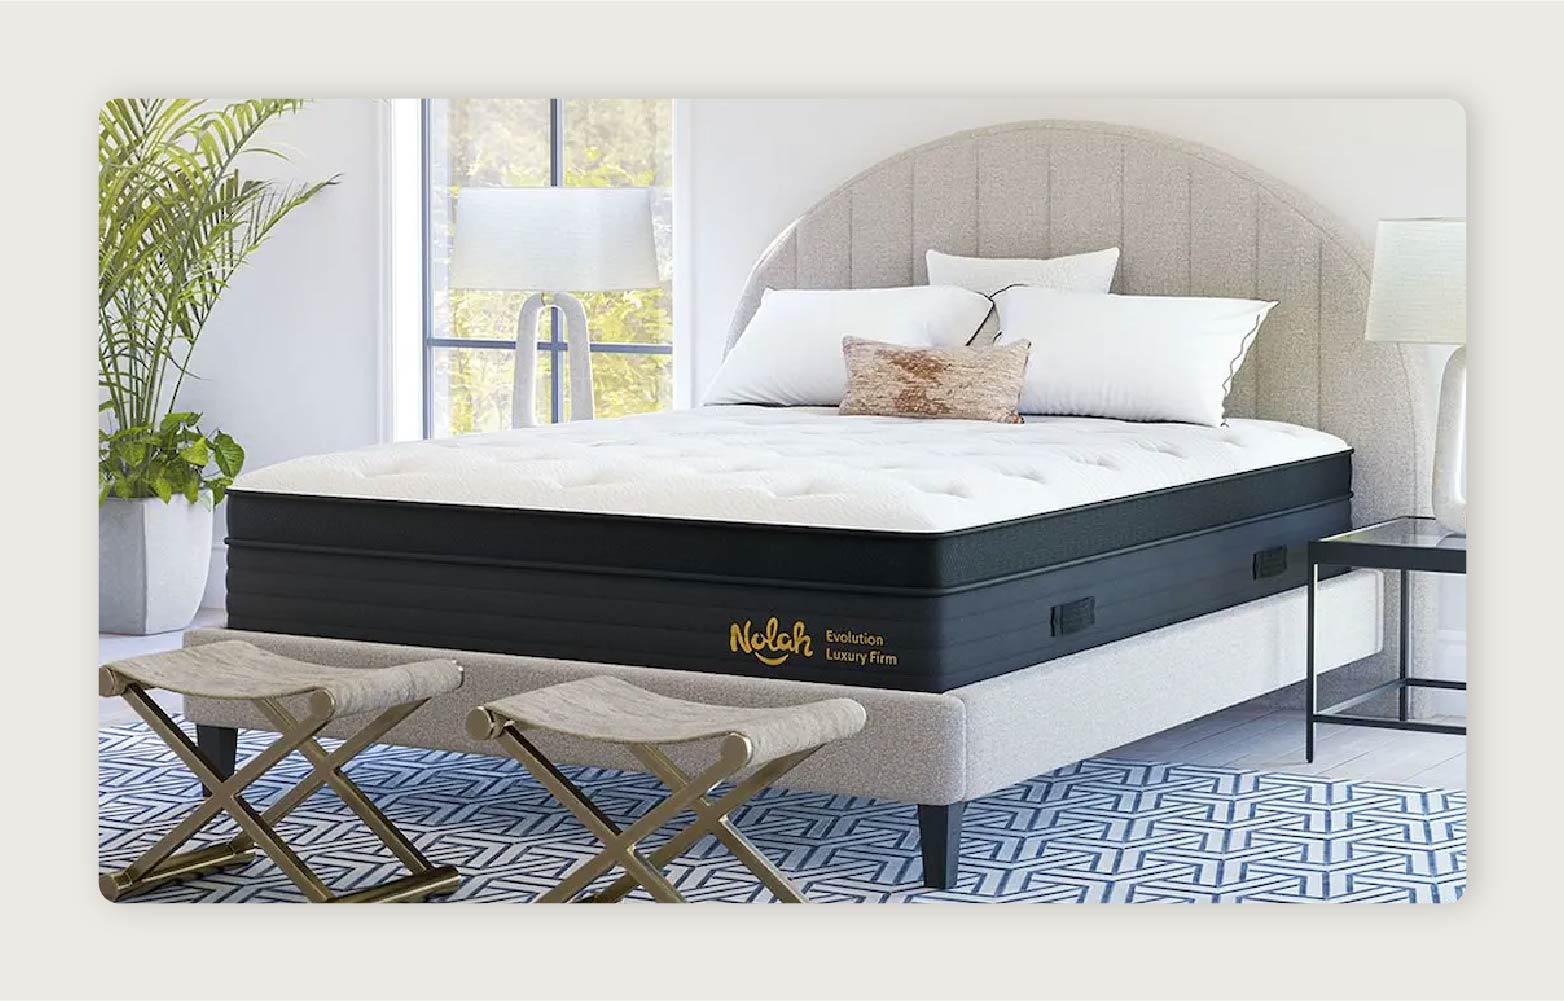 The Nolah Evolution 15” Mattress in a bright room with a tall green plant and two small tables. 